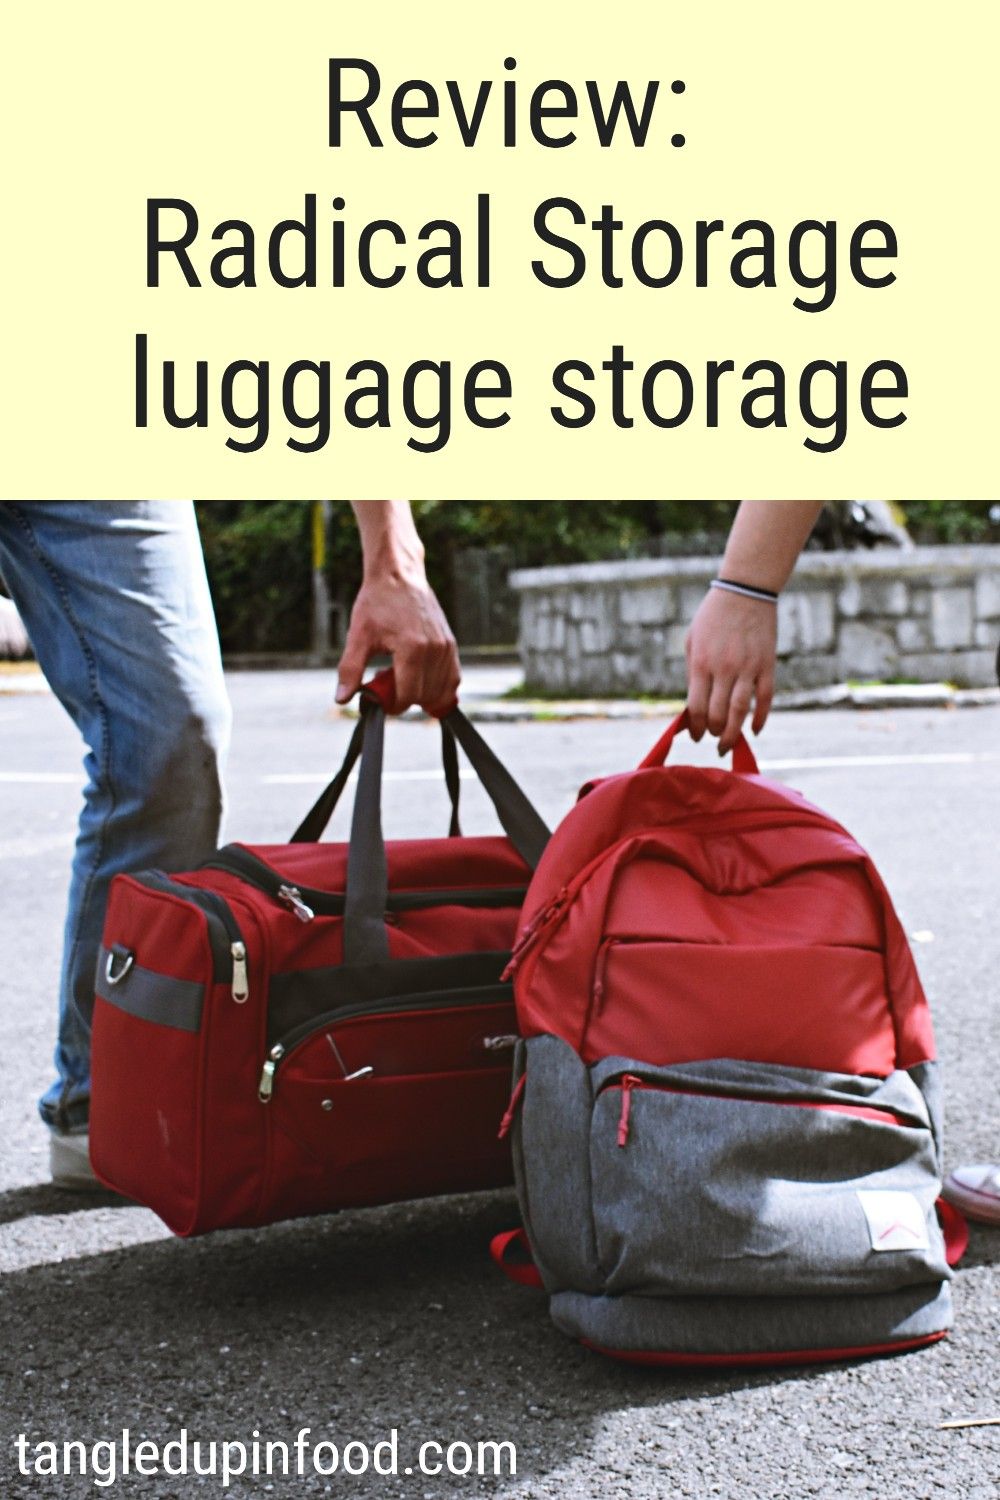 Hands holding duffel bag and backpack with text reading "Review: Radical Storage luggage storage"